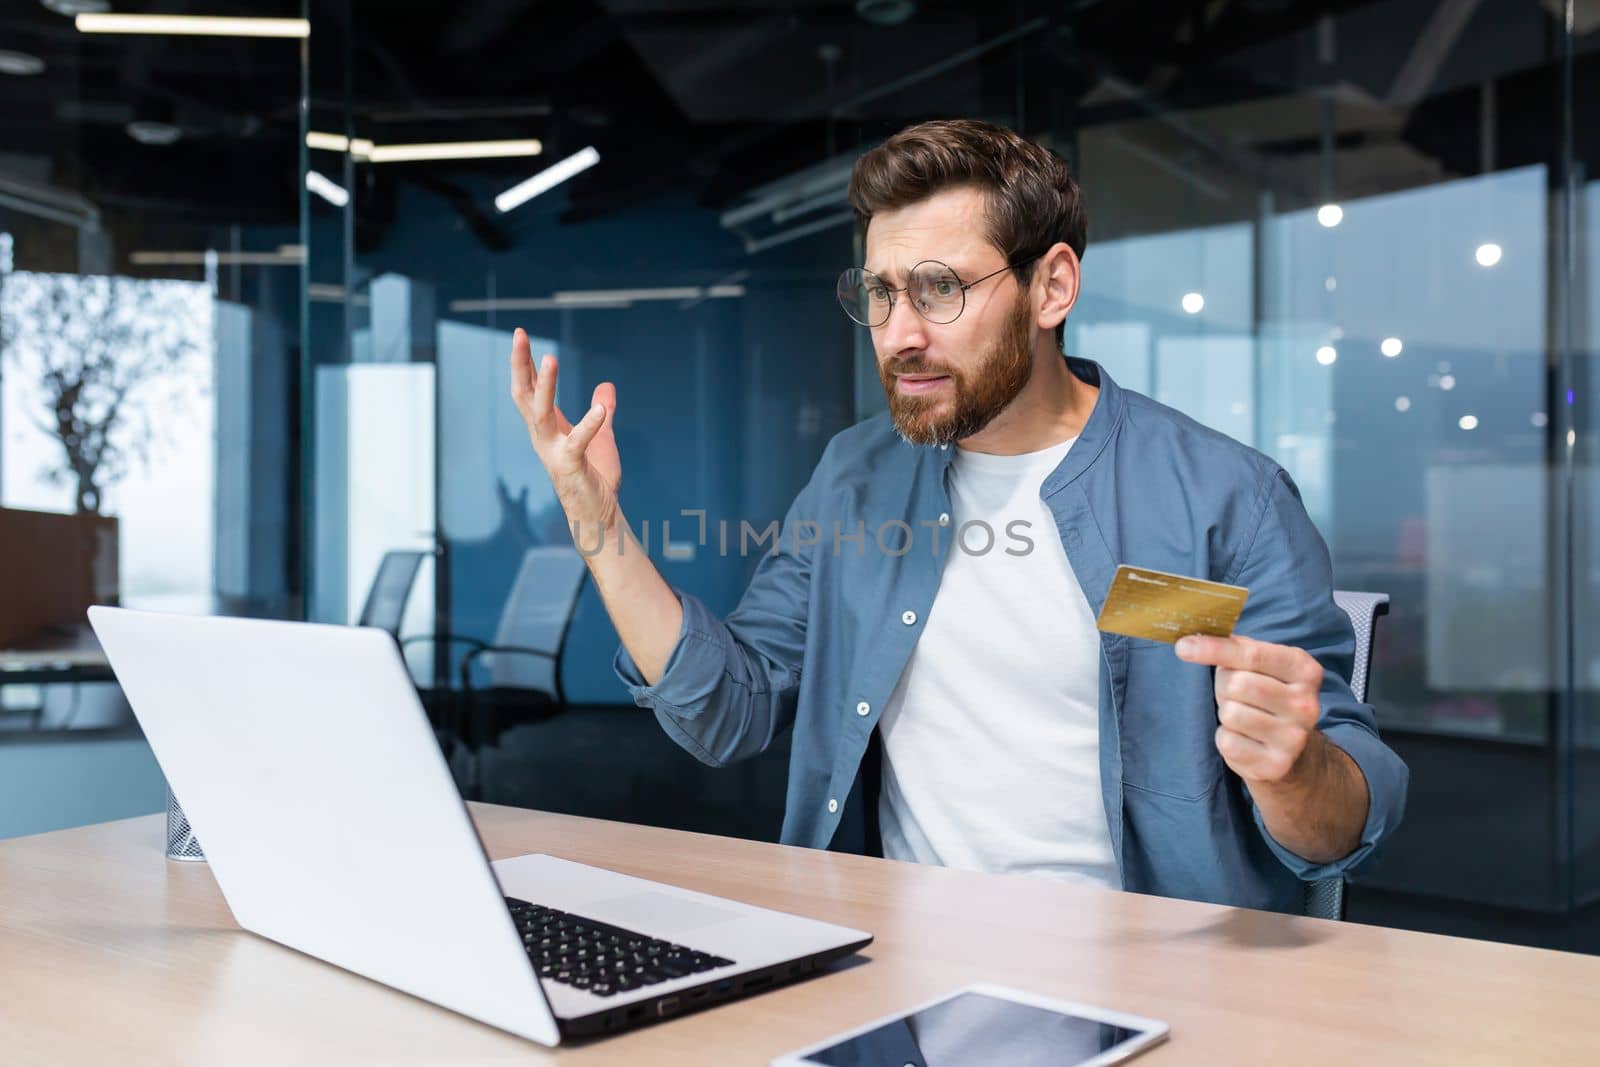 Bankruptcy, financial problems. Angry and worried young man sitting in the office, holding a credit card, looking at a laptop. Checks the account, funds. He waves his arms angrily.